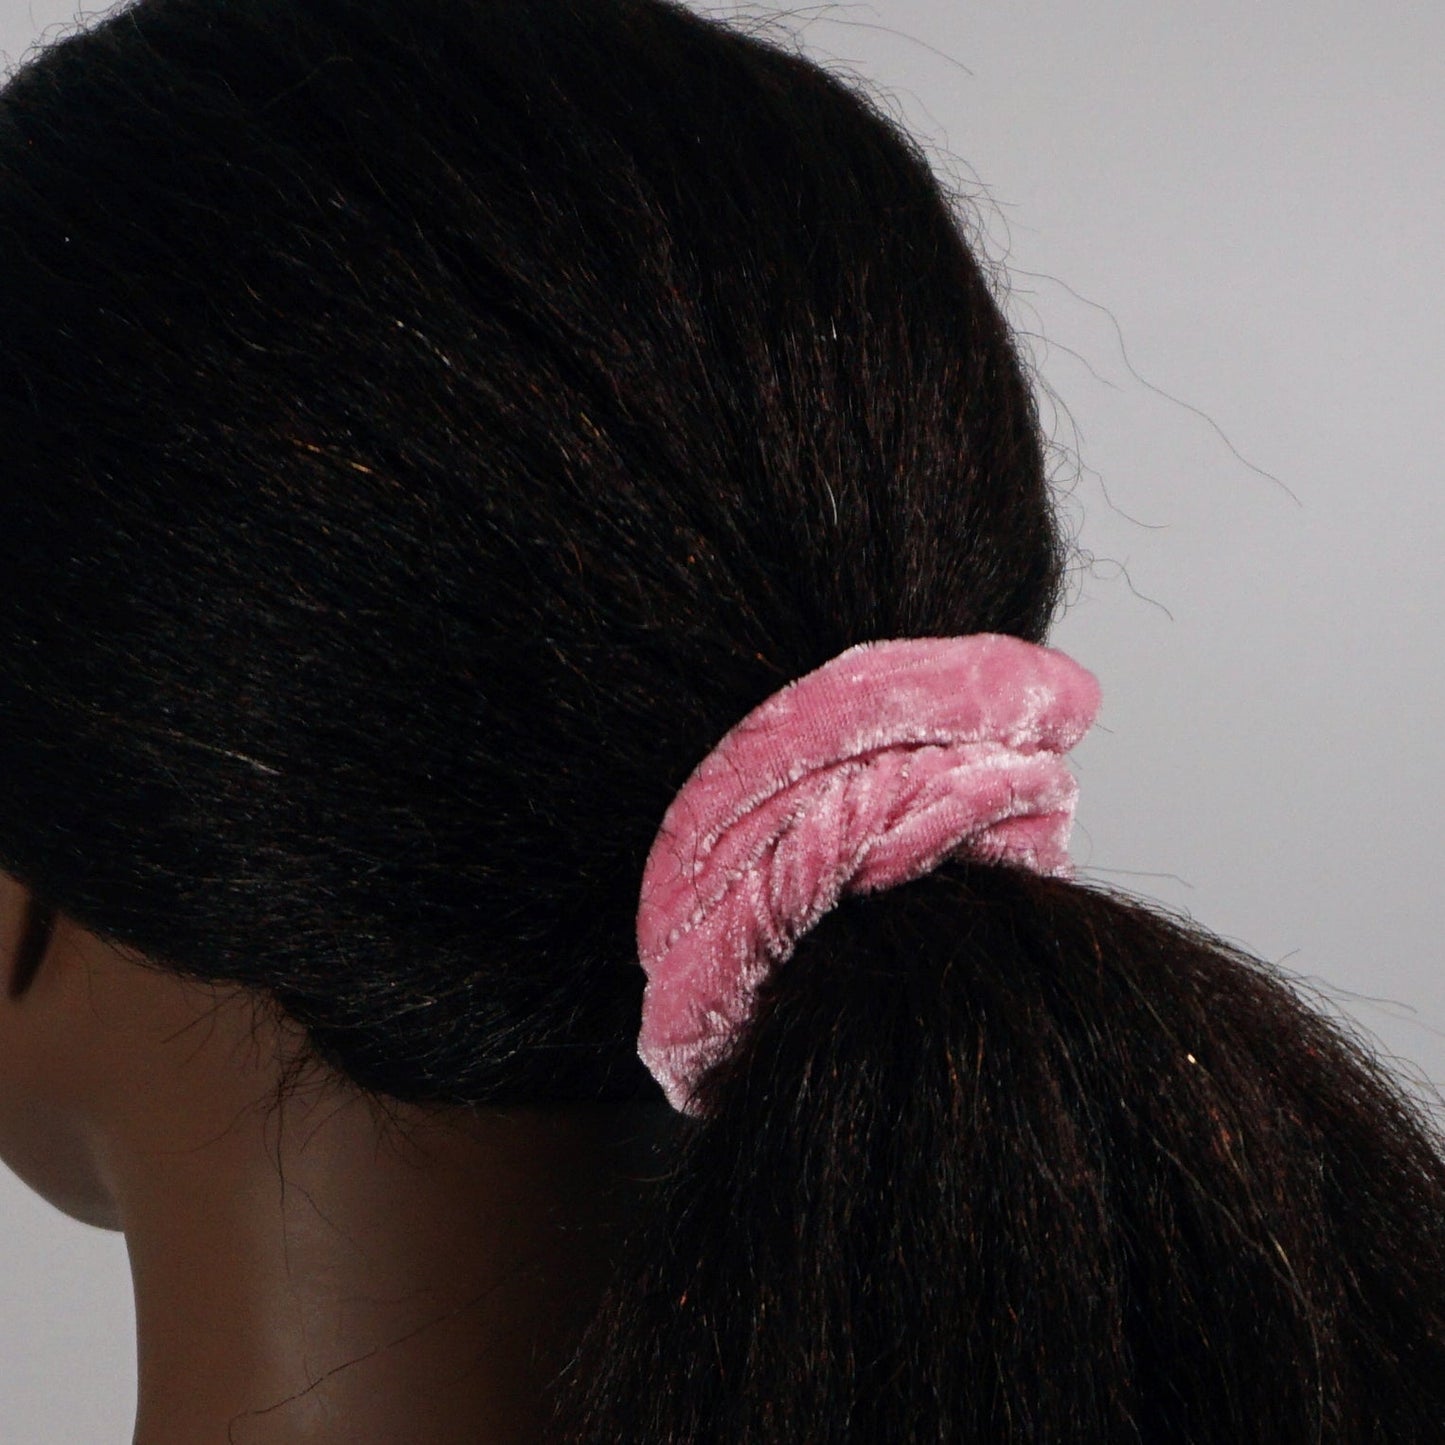 Amelia Beauty Products, Pink Velvet Velvet Scrunchies, 3.5in Diameter, Gentle on Hair, Strong Hold, No Snag, No Dents or Creases. 8 Pack - 12 Retail Packs